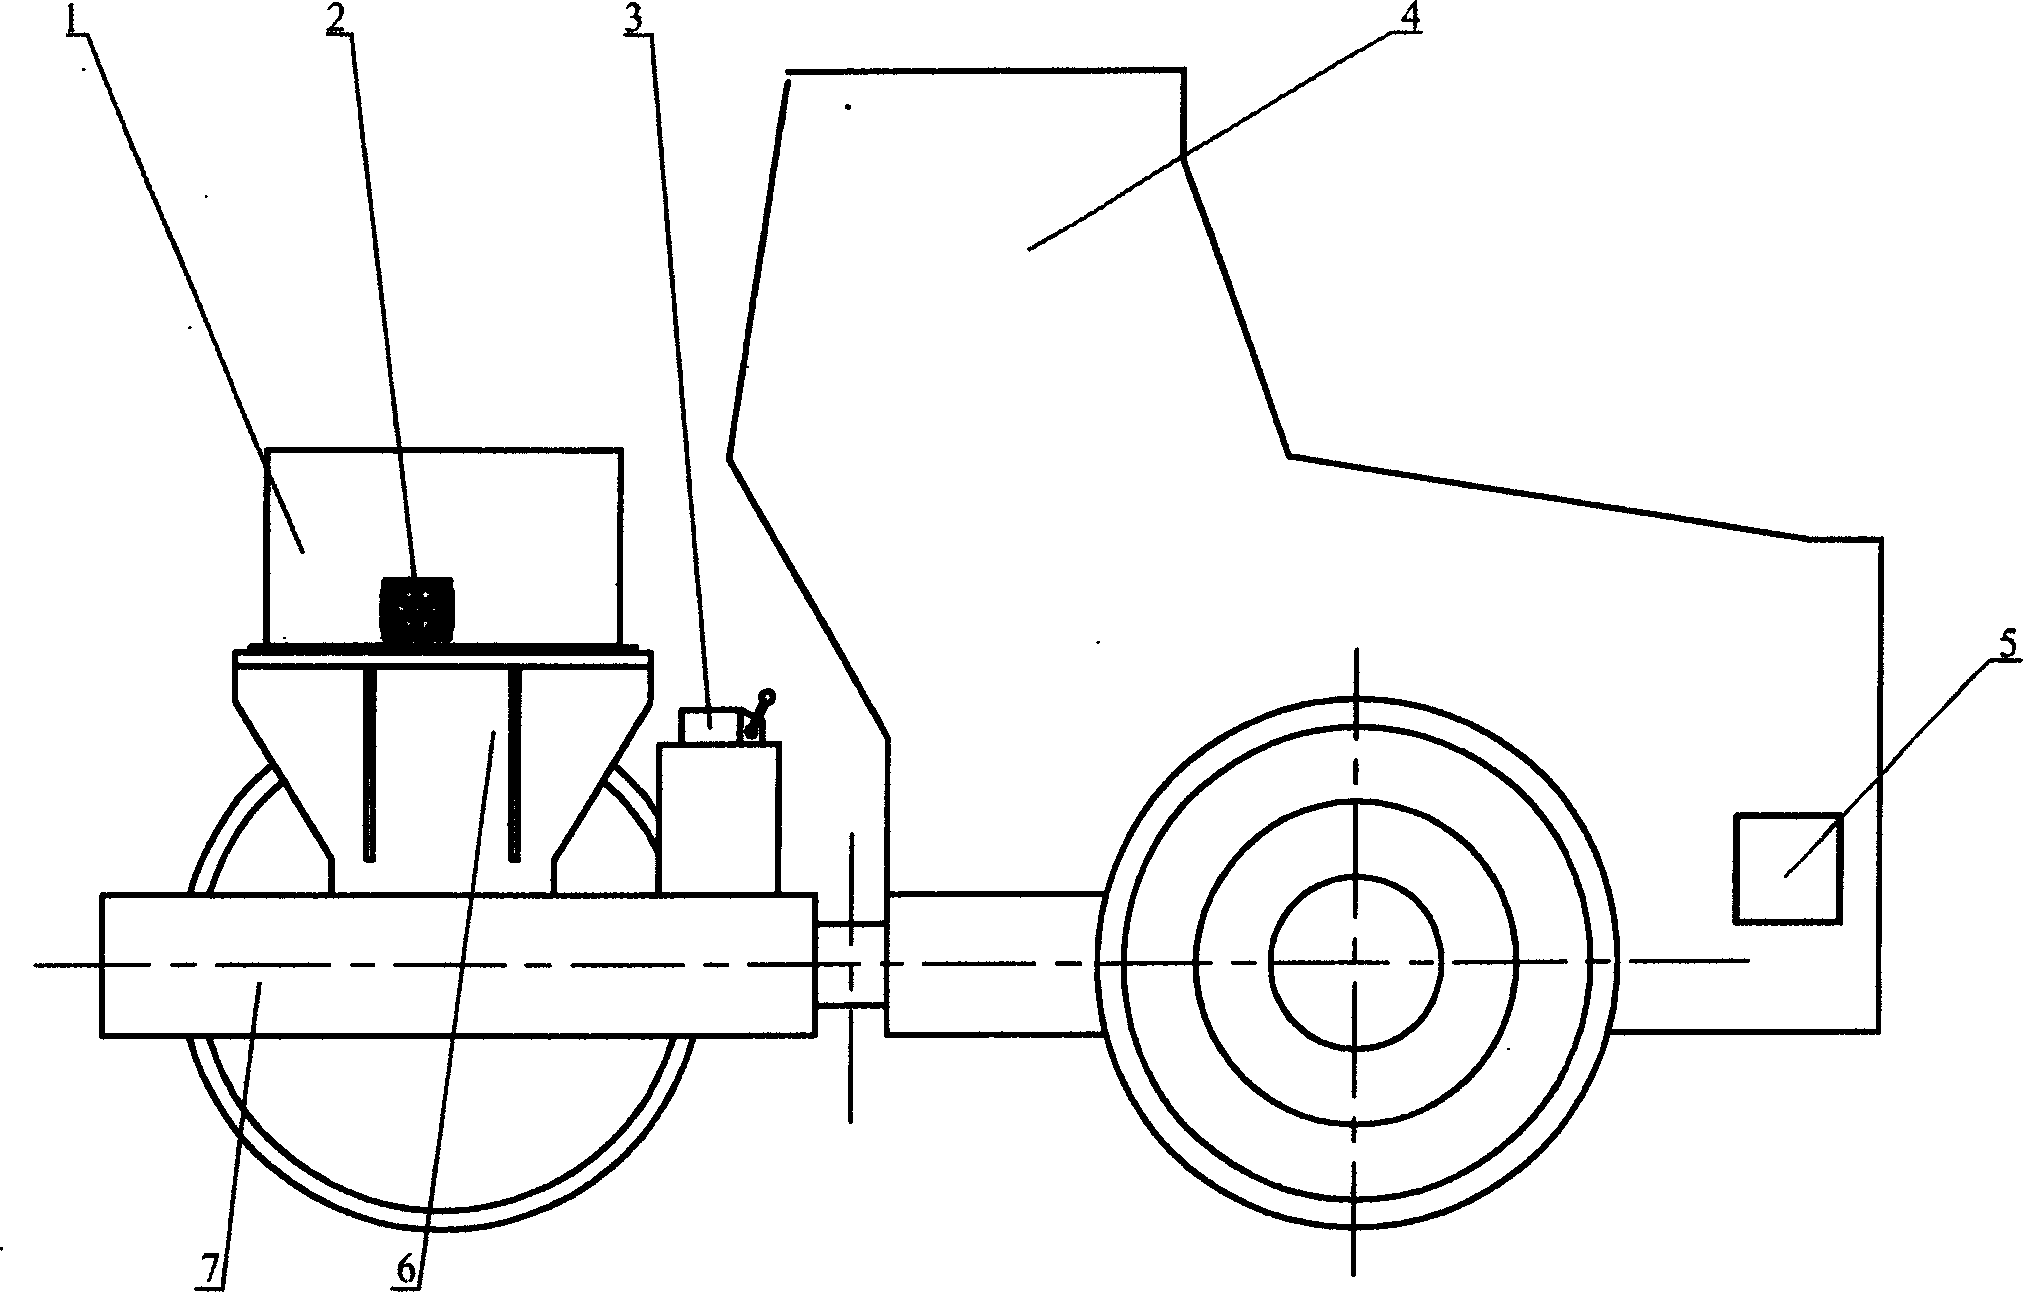 Loading unit for simulating vehicle dynamic load on pavement